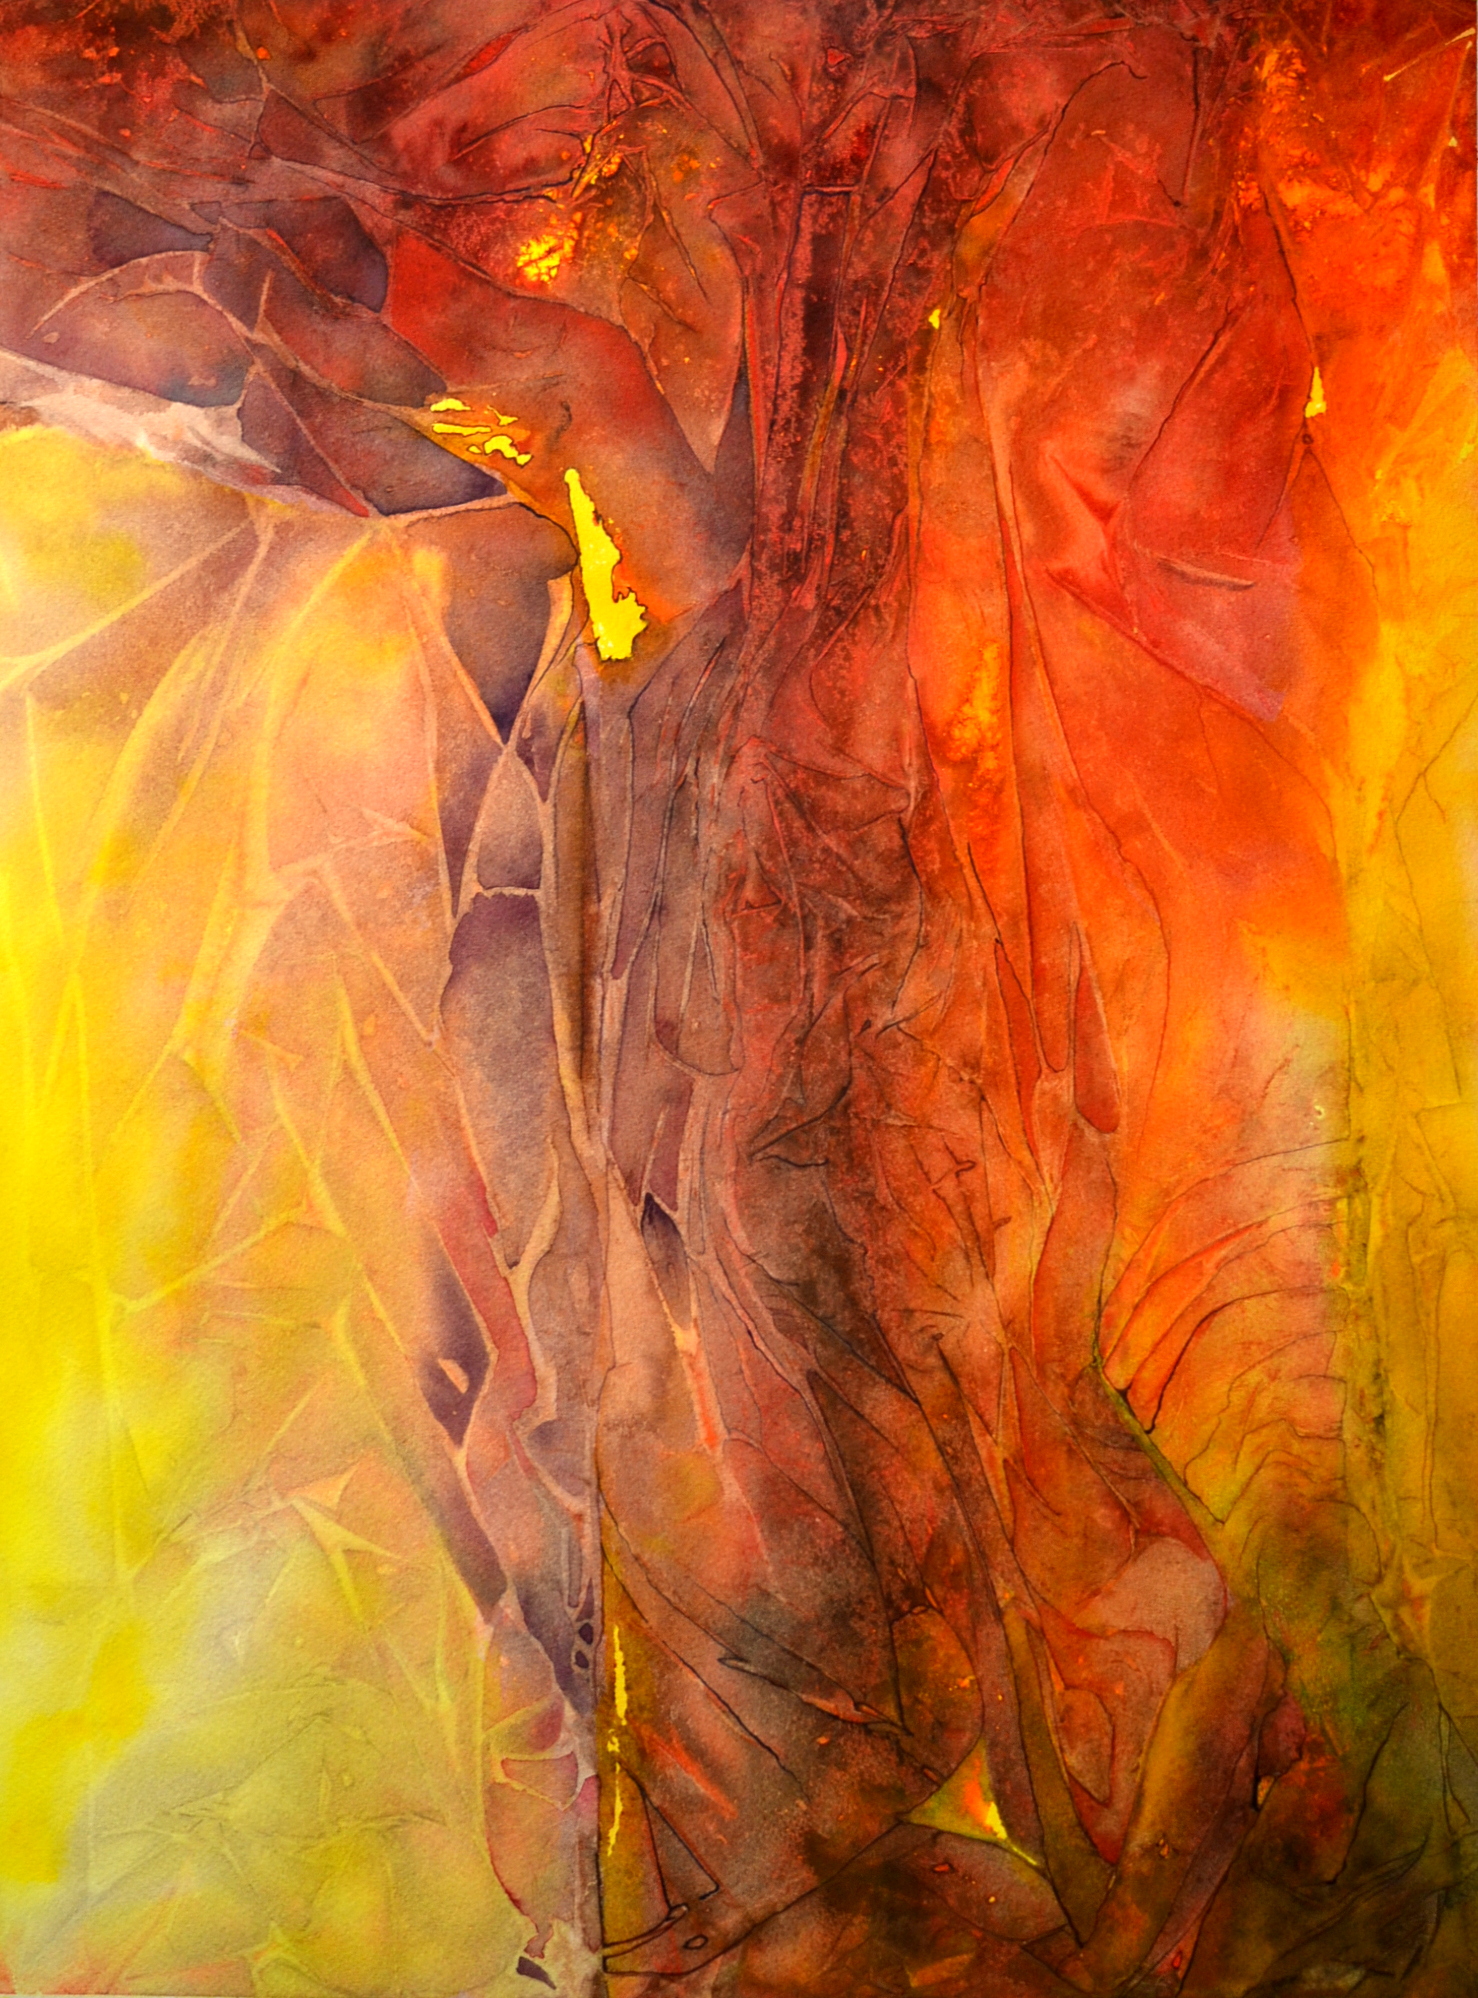 Watercolour. Ancient Embers. Size 75x57 cm. unframed. Price $380.00.JPG